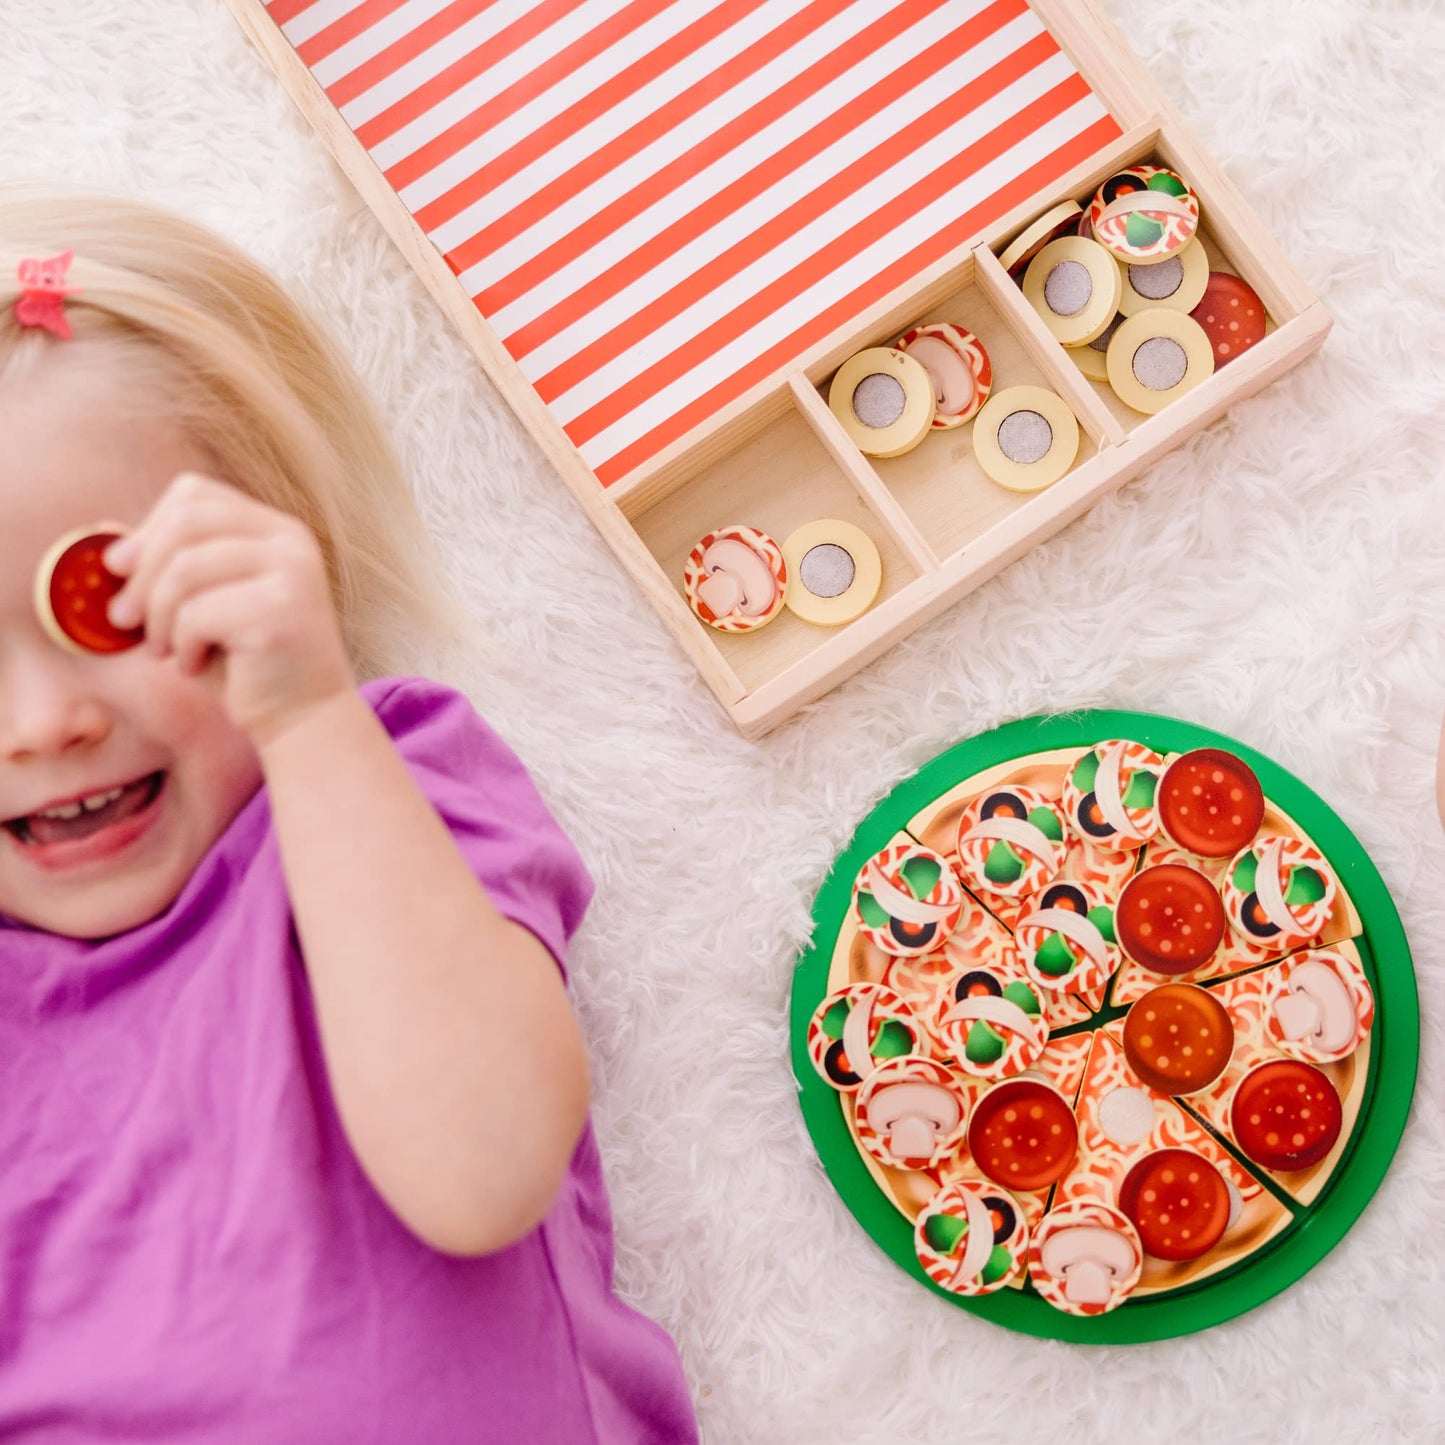 Melissa & Doug Wooden Pizza Play Food Set With 36 Toppings - Pretend Food And Pizza Cutter/ Toy For Kids Ages 3+